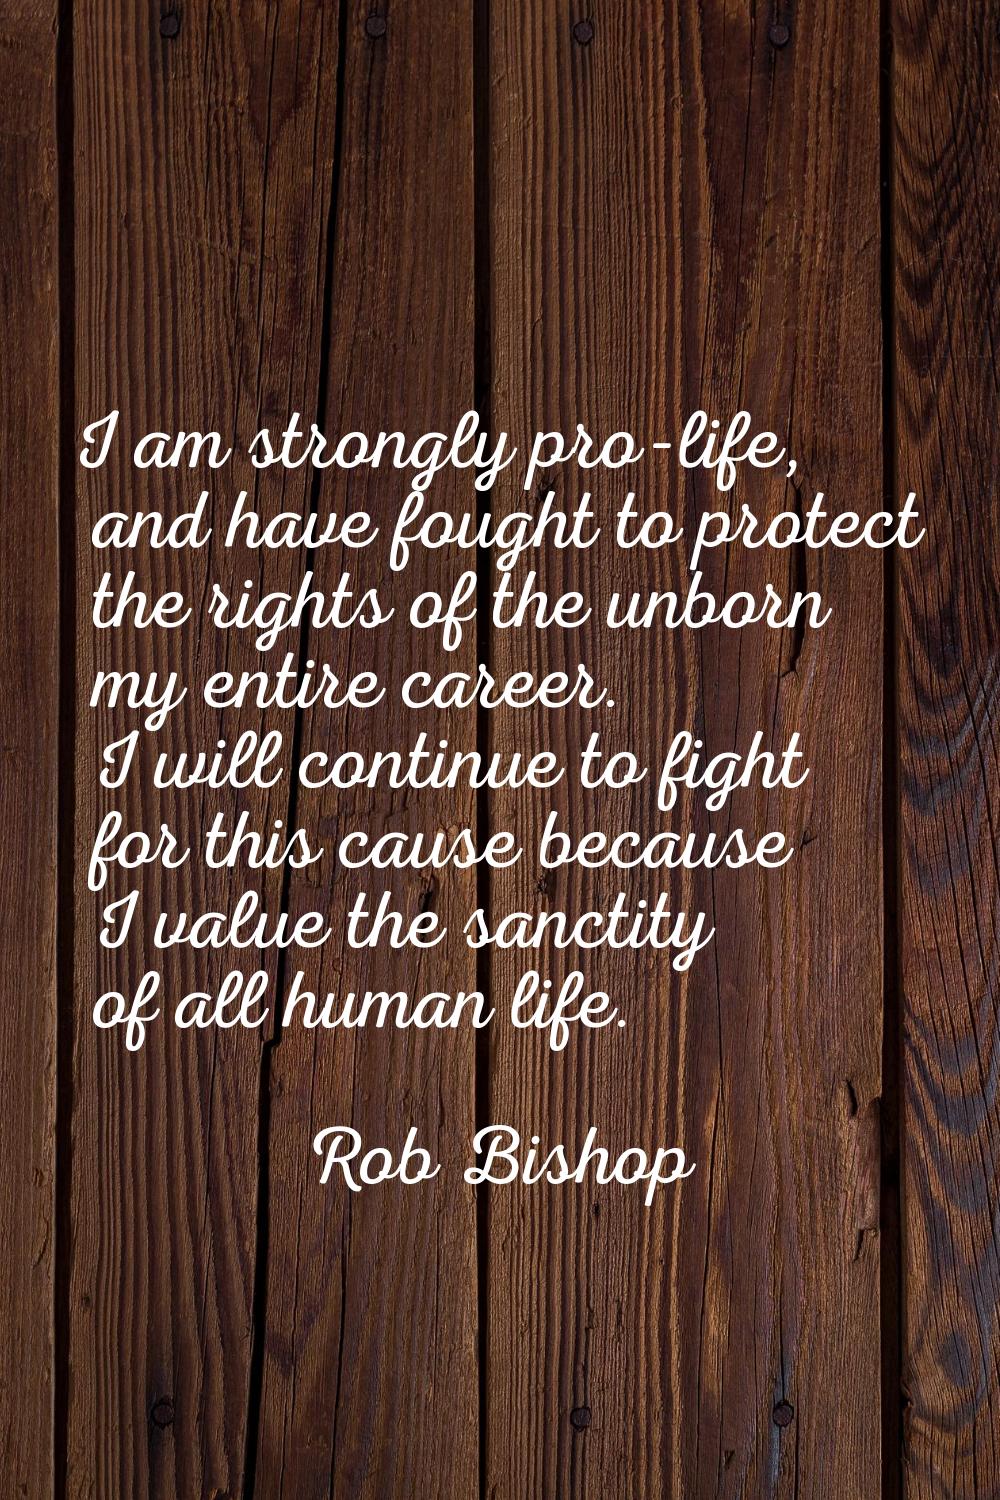 I am strongly pro-life, and have fought to protect the rights of the unborn my entire career. I wil